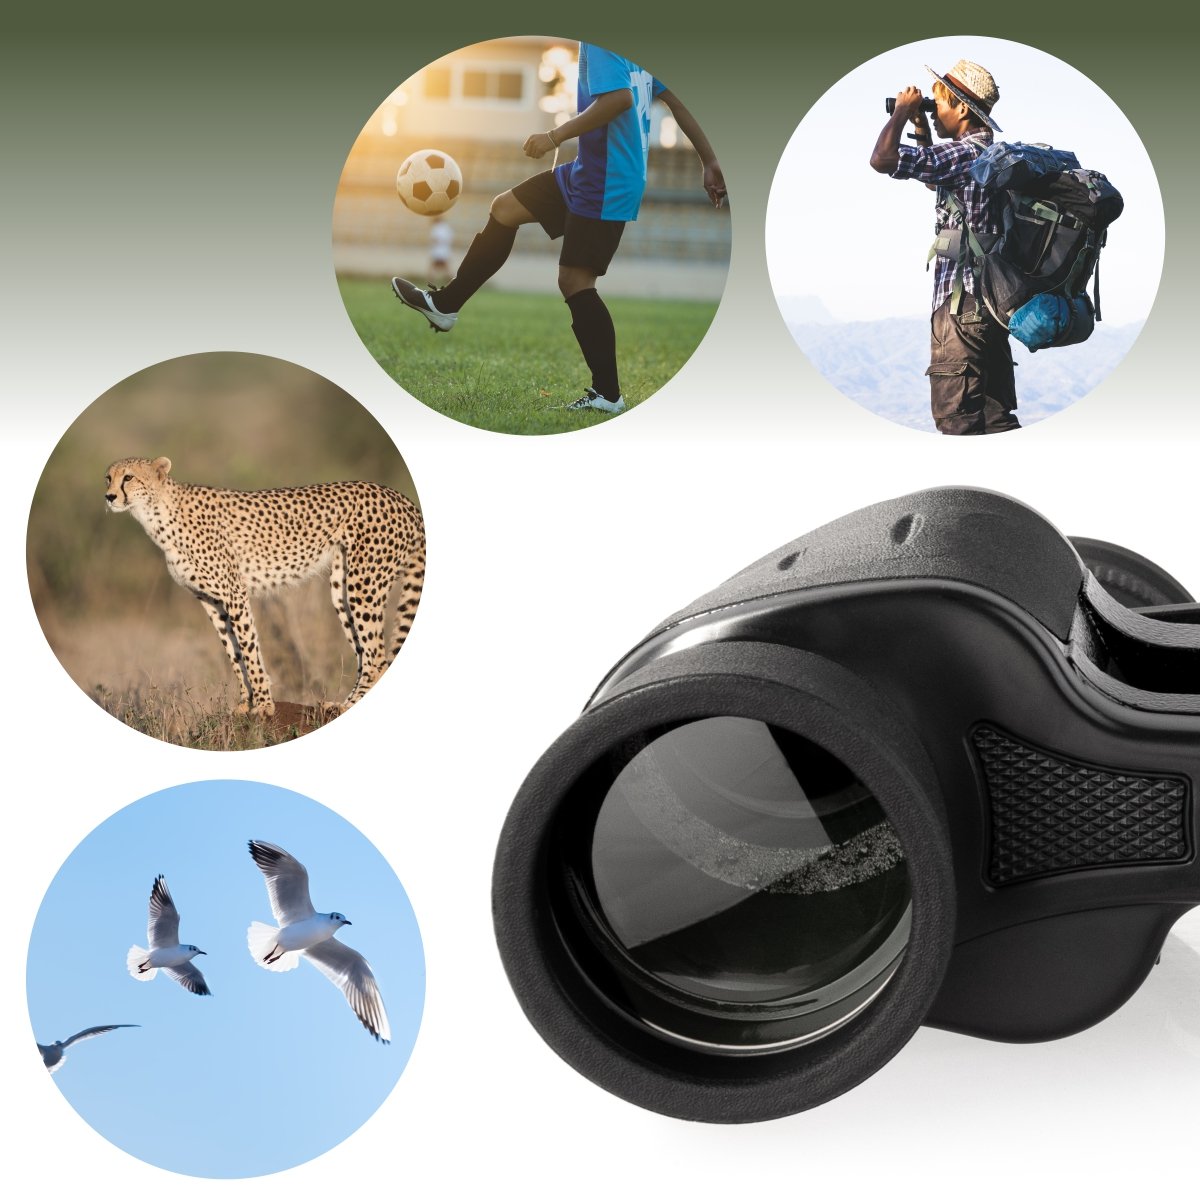 12x42 Black Large Binocular could be used to explore the distant world around you. 